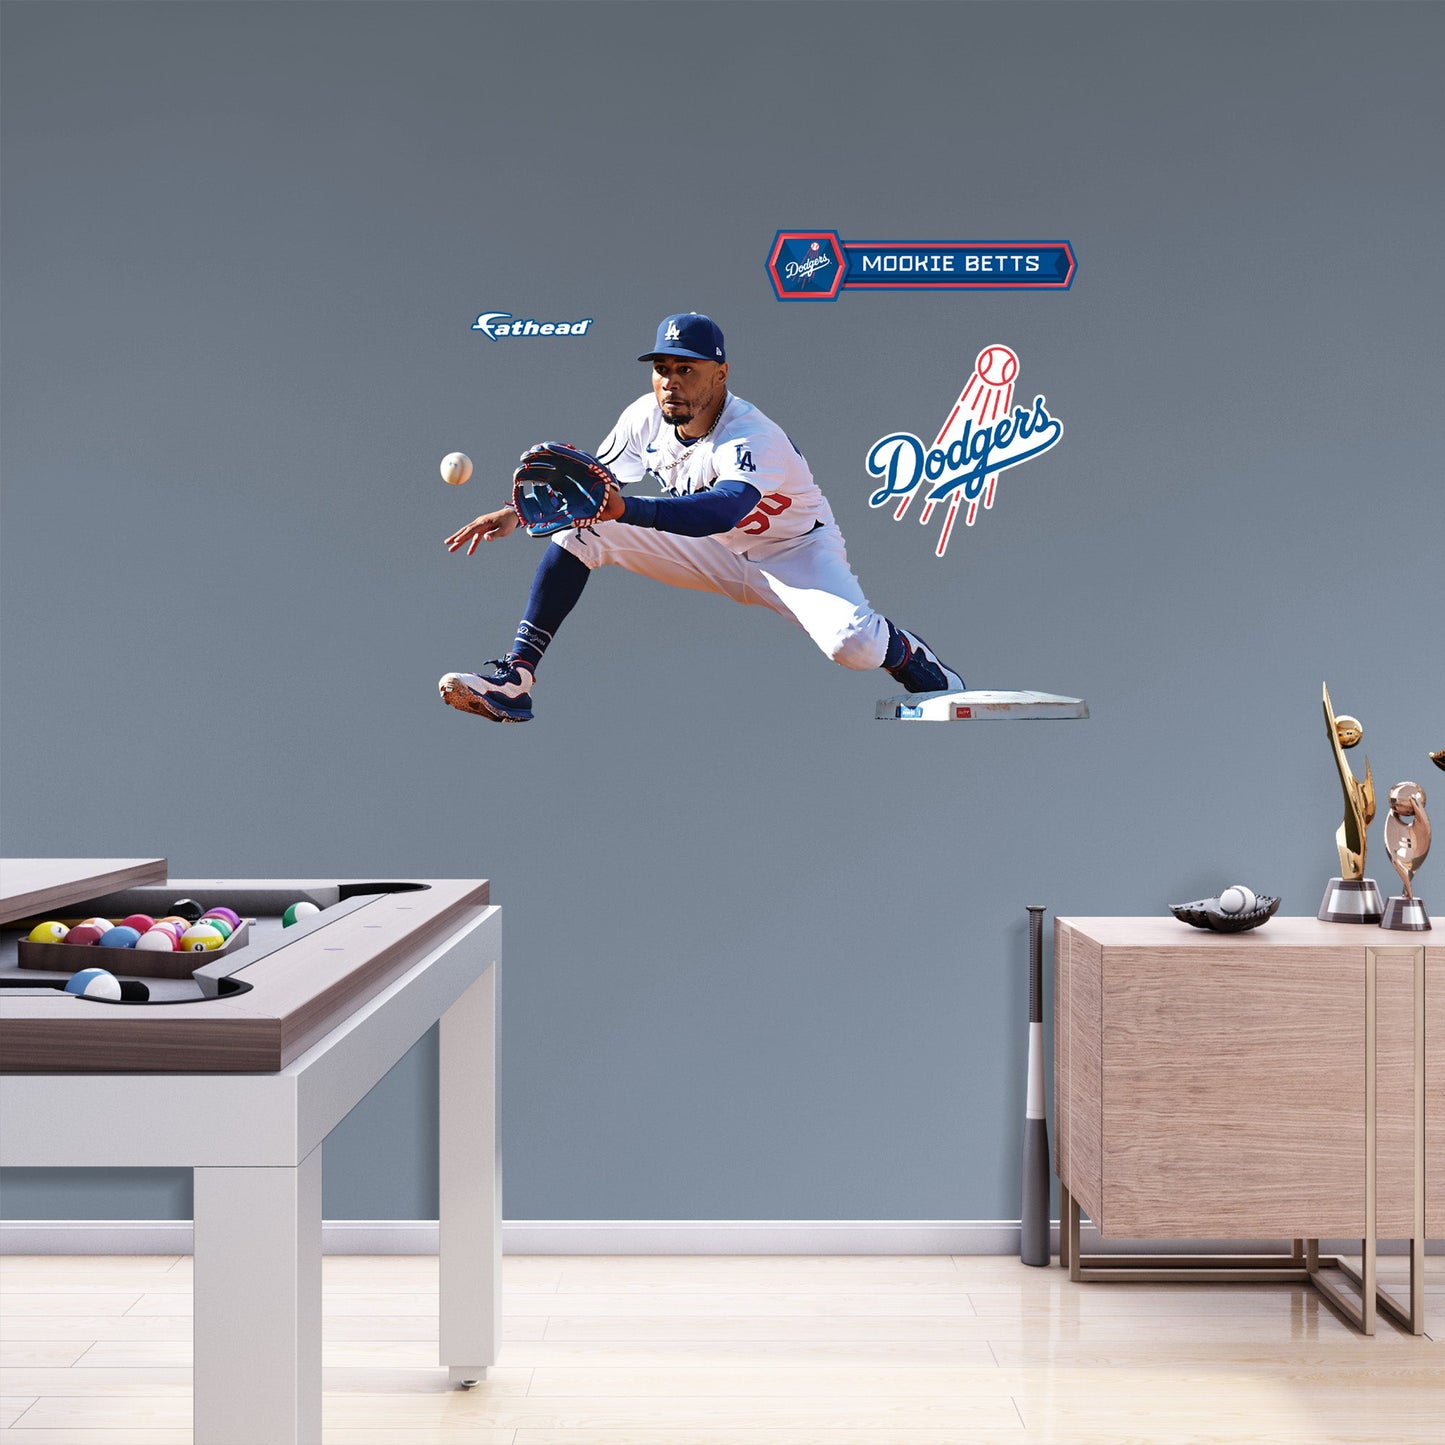 Los Angeles Dodgers: Mookie Betts  Fielding        - Officially Licensed MLB Removable     Adhesive Decal